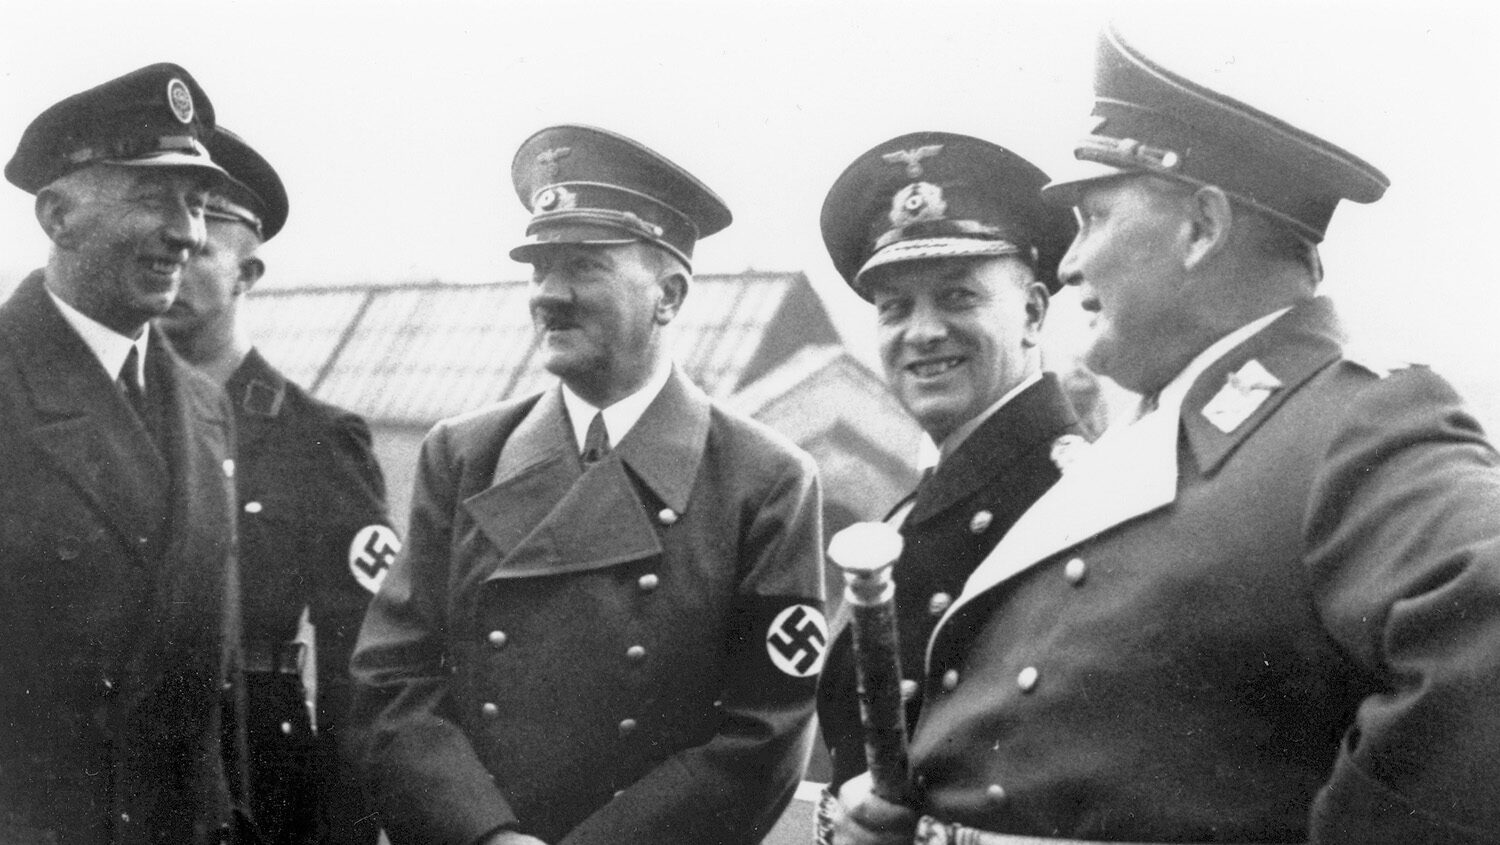 Hitler chats with Göring and Grand Admiral Erich Raeder prior to the launching of Graf Zeppelin.